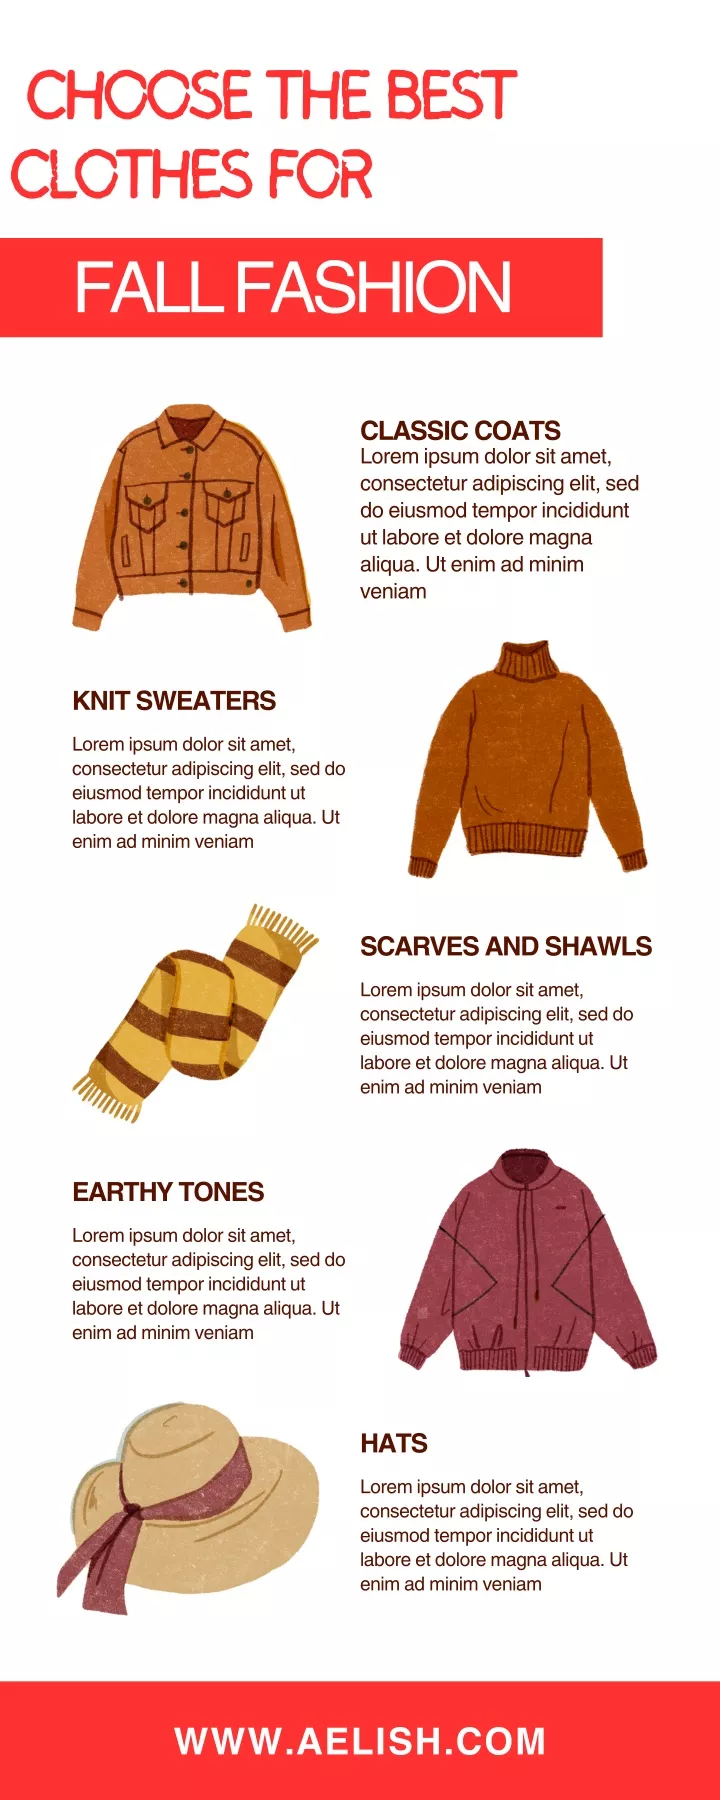 choose the best clothes for fall fashion